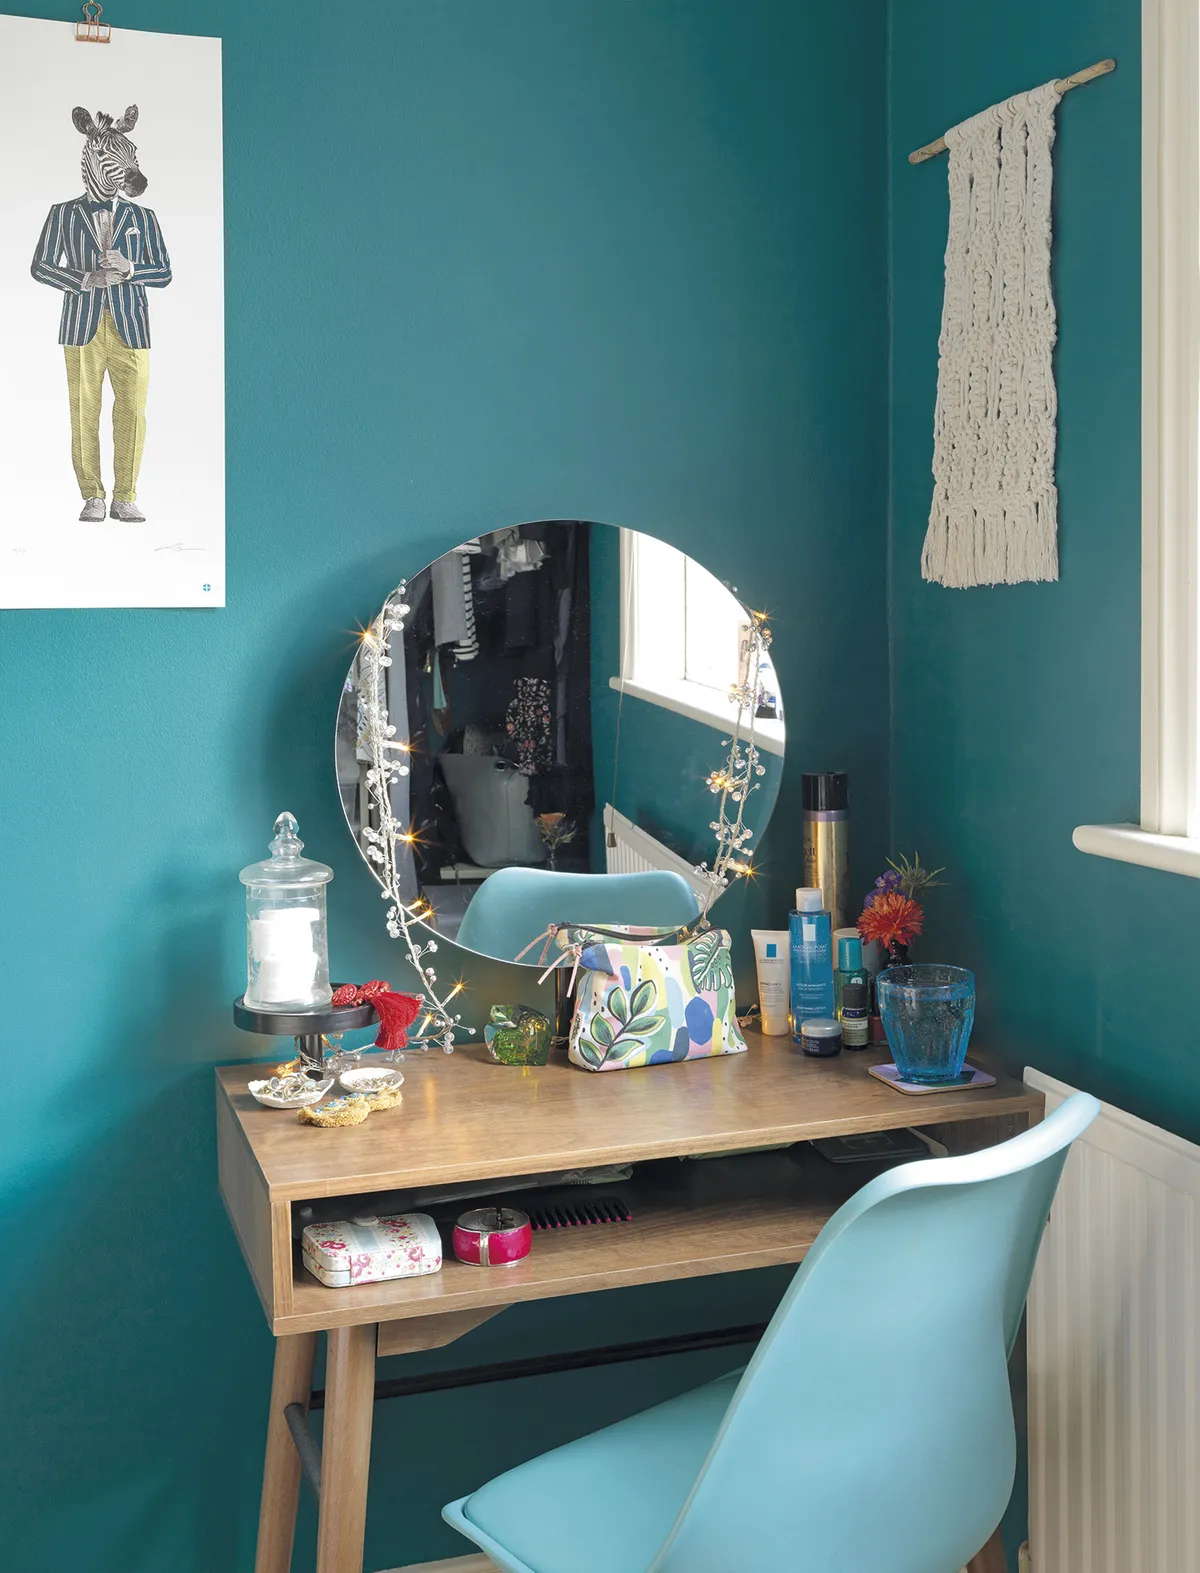 ‘I recently got rid of my shabby chic dressing table and bought this modern alternative. I think the dark wood sits perfectly with the green walls.’ Emily bought the zebra print by Kerry Eggleton from a local art fair. ‘It was a second, so I got a real bargain’